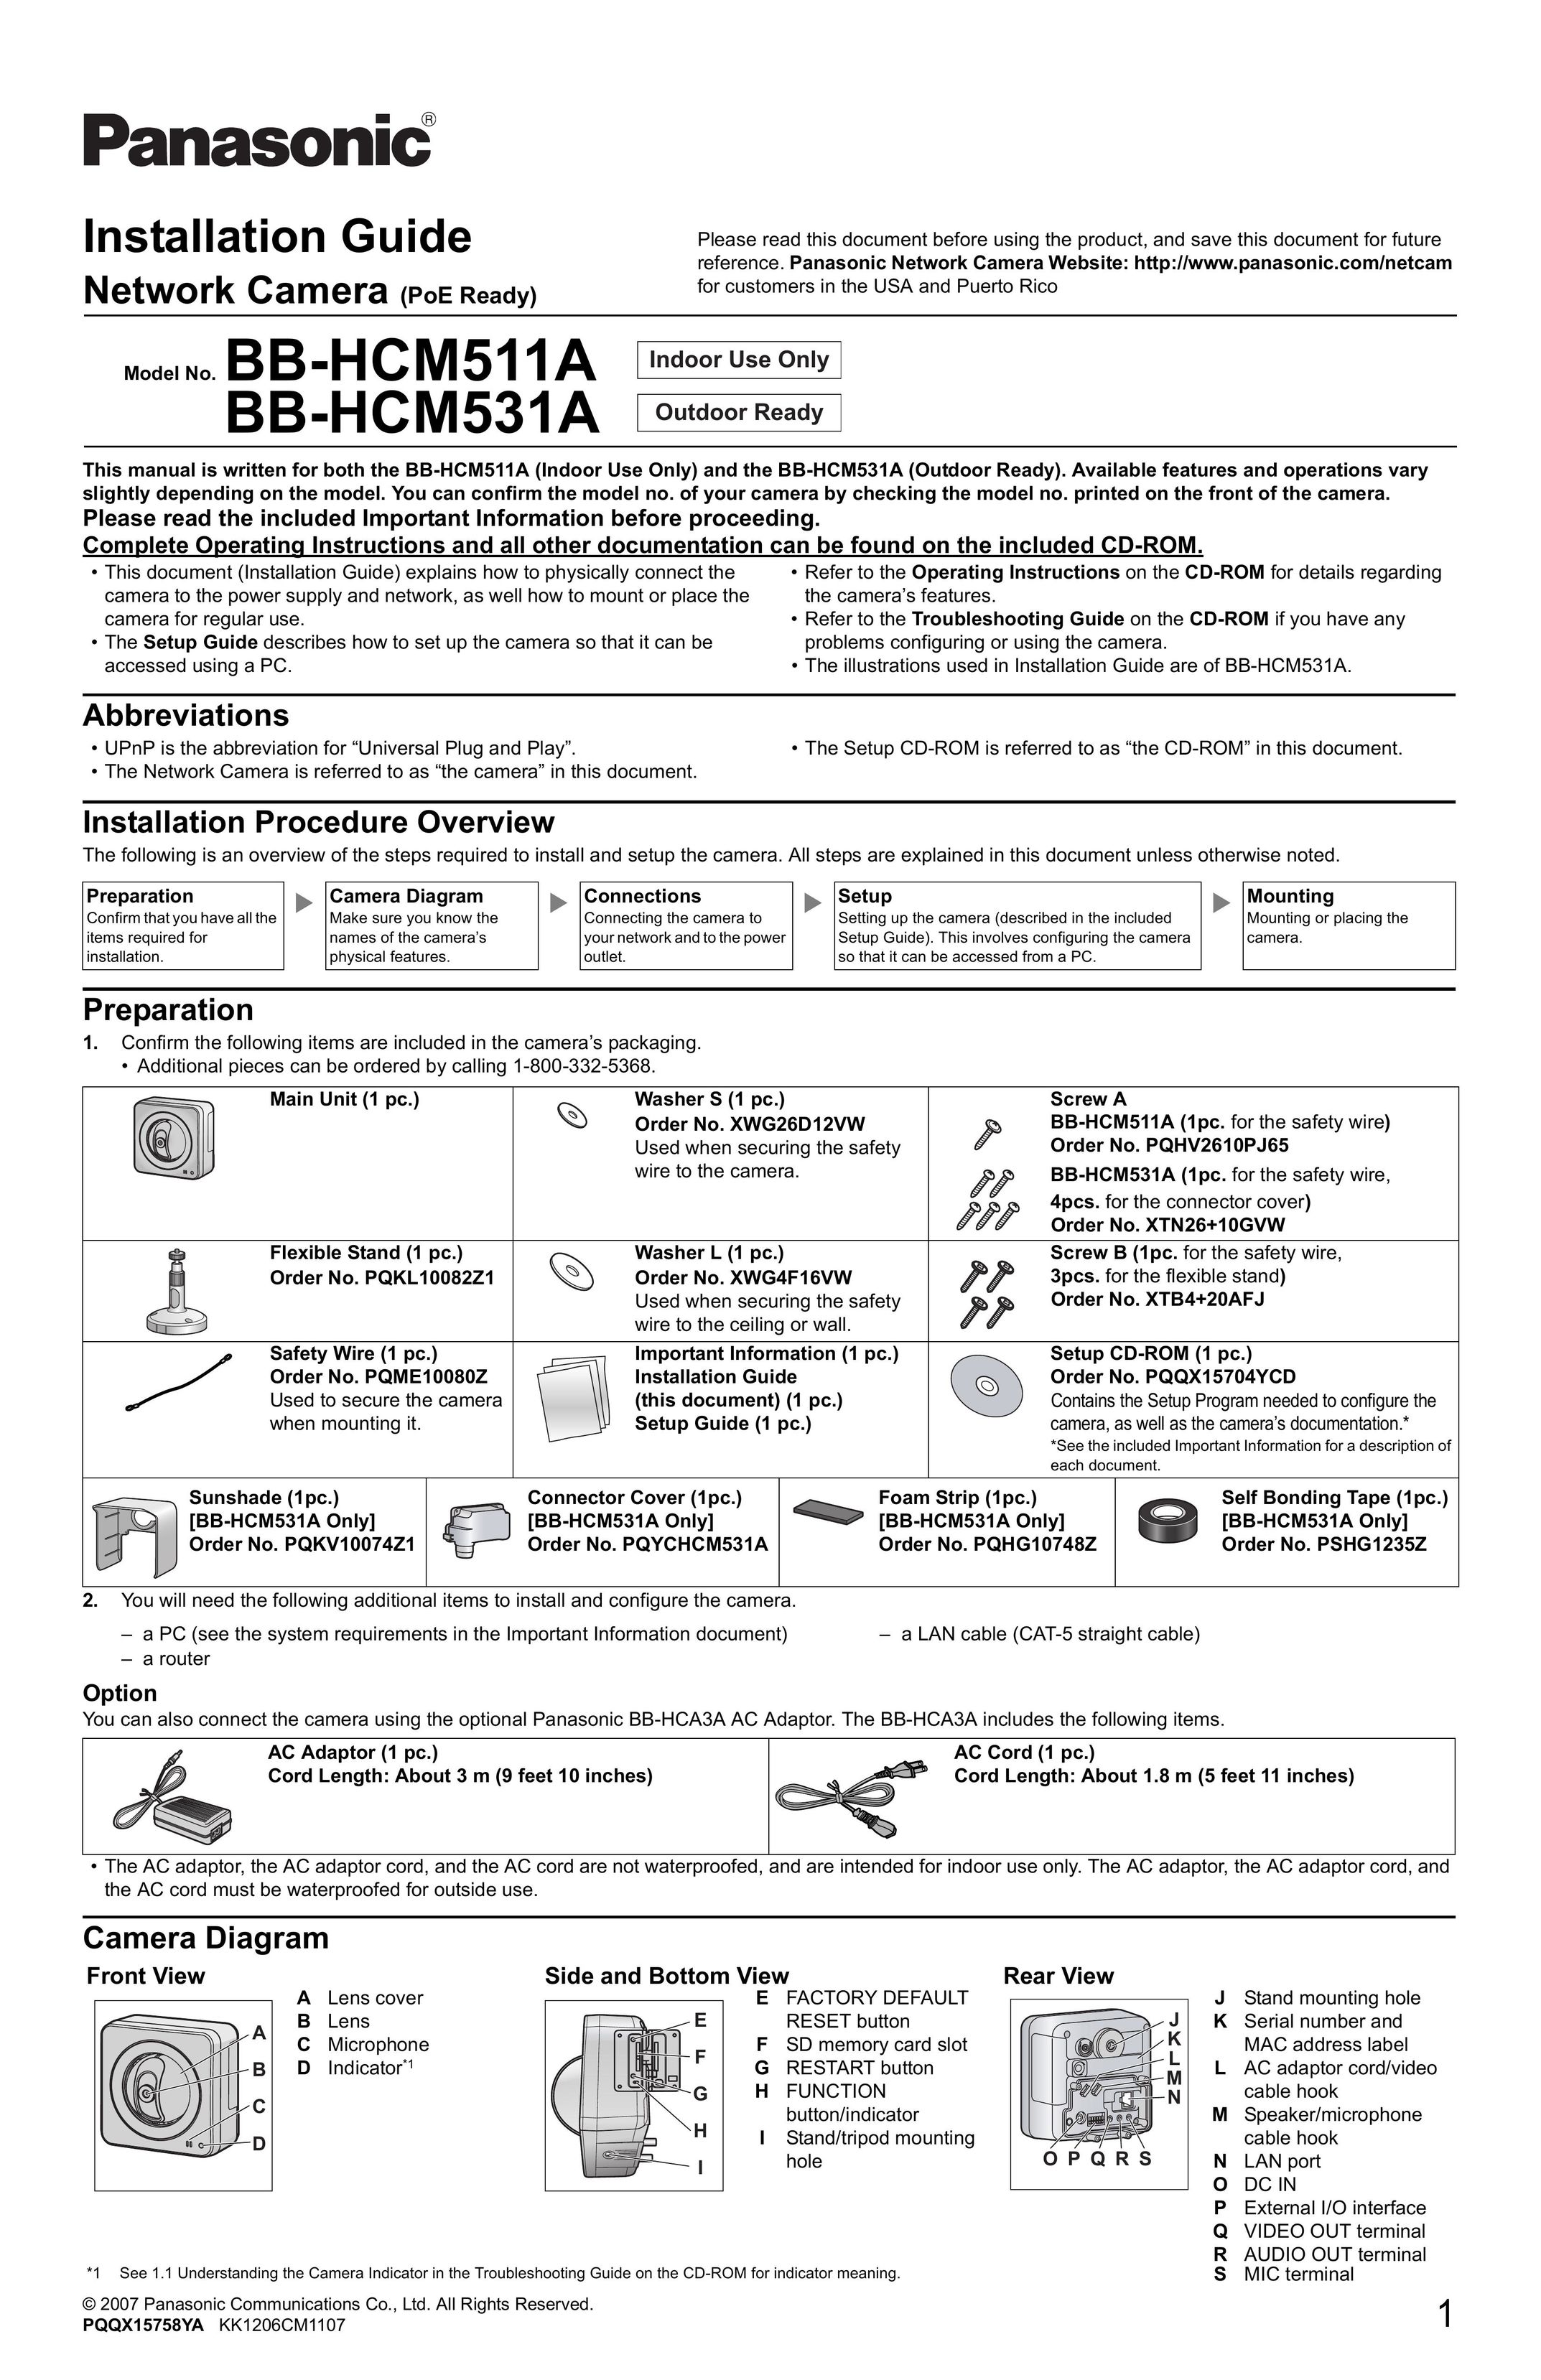 Panasonic BB-HCM511A Home Security System User Manual